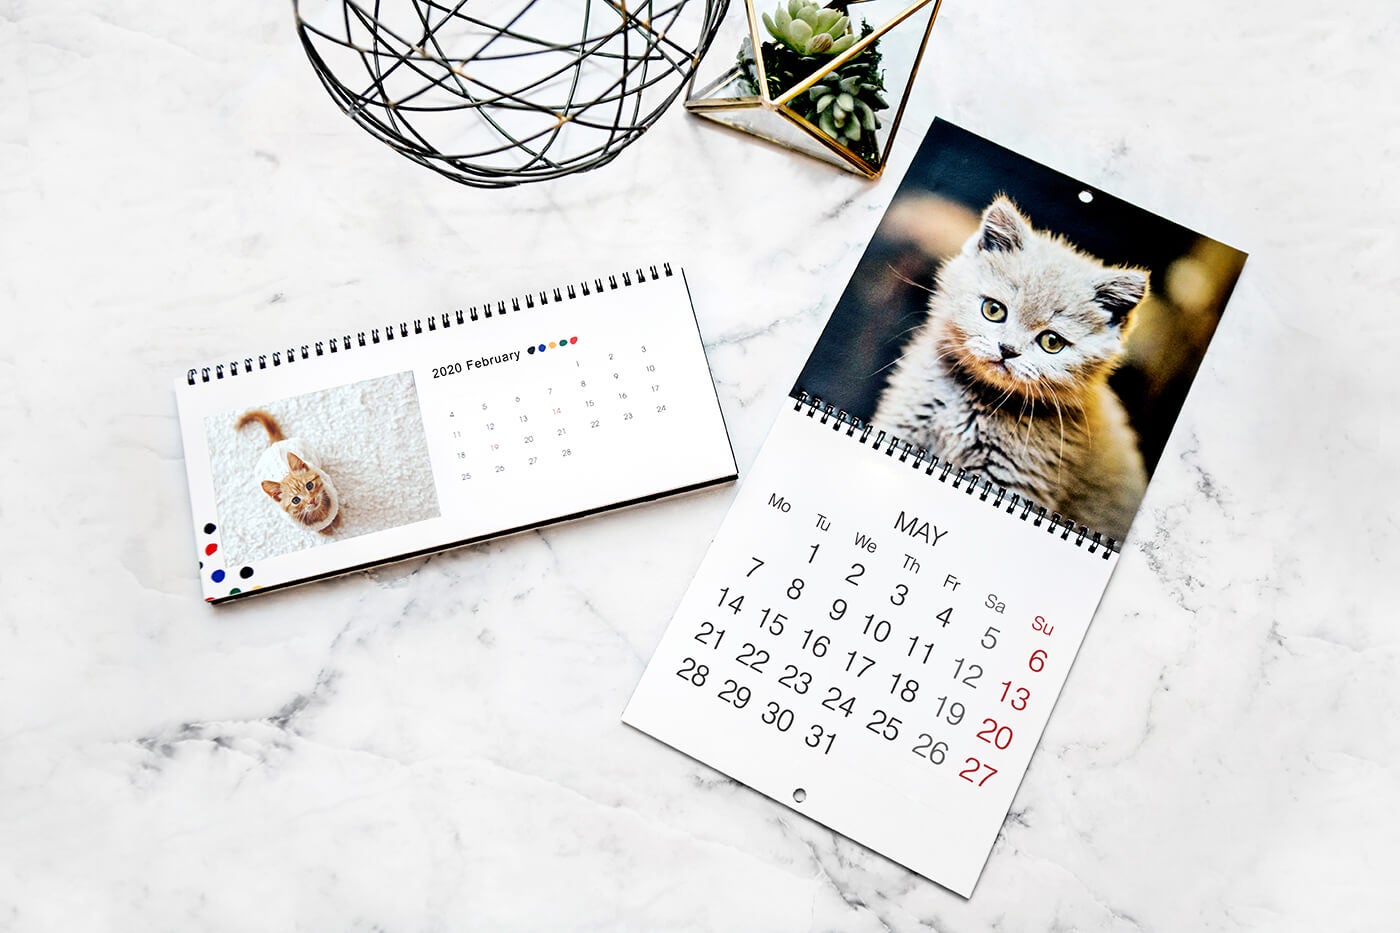 calendars of kittens printed by printique